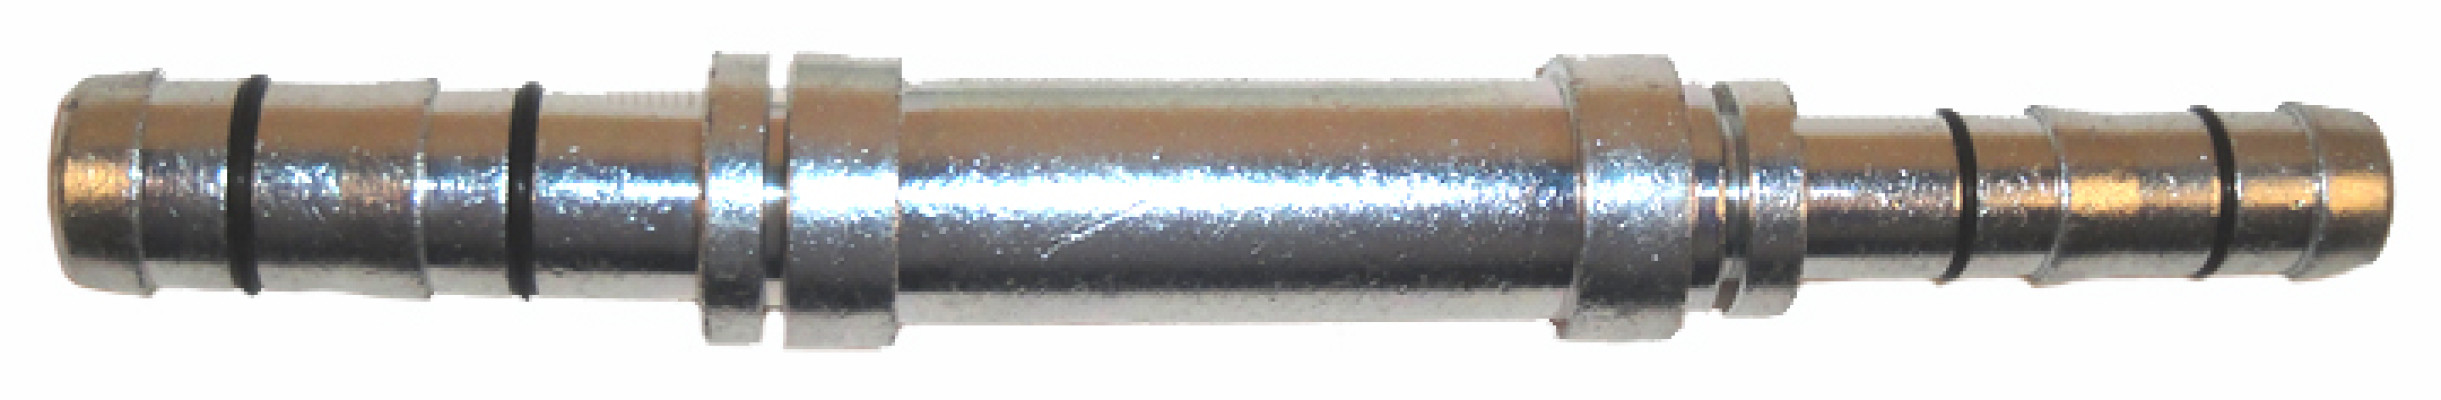 Image of A/C Refrigerant Hose Fitting from Sunair. Part number: FJ3045-1008S